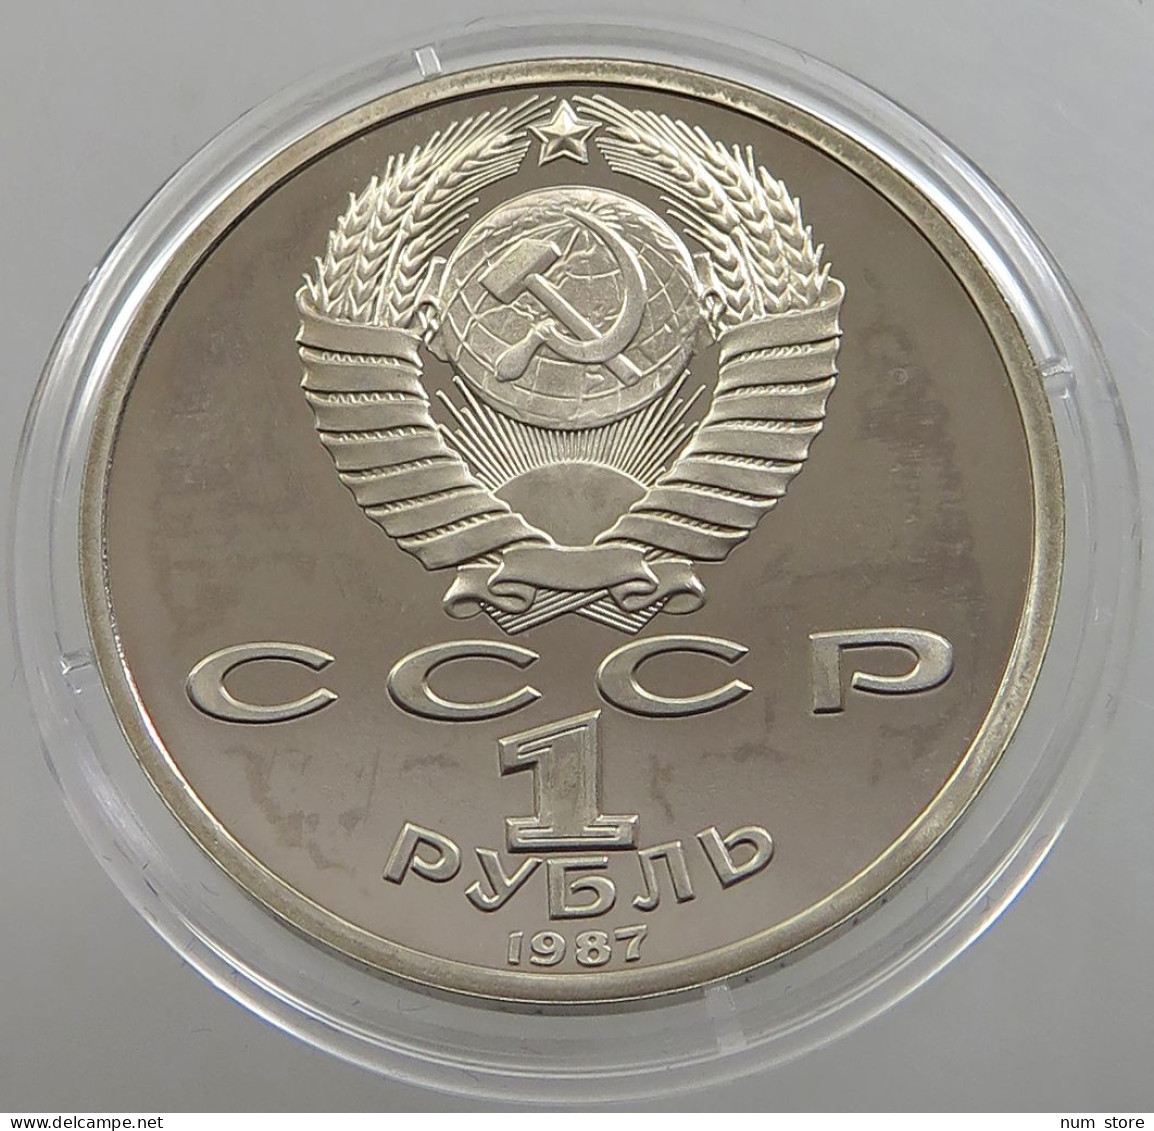 RUSSIA USSR 1 ROUBLE 1987 PROOF #sm14 0621 - Rusland